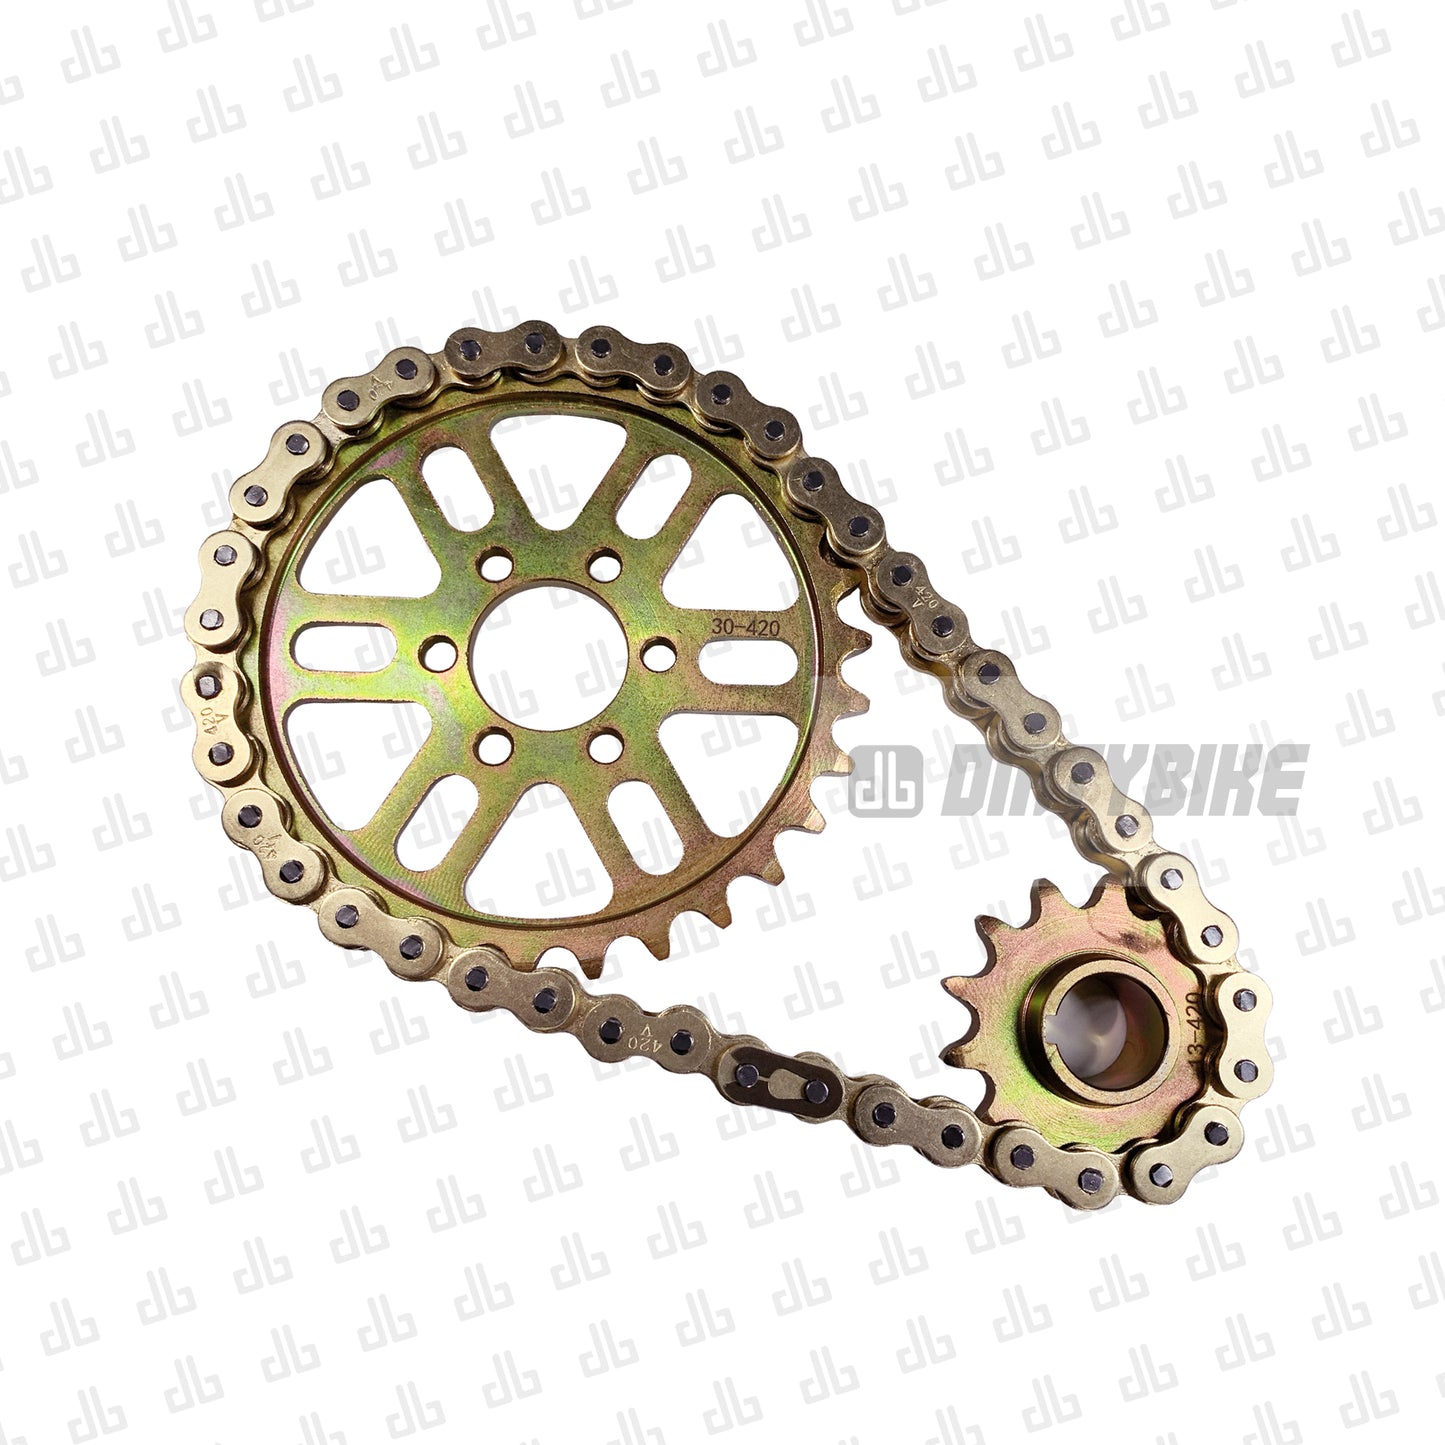 DirtyBike 420 Gold Series Primary Belt to Chain Conversion Kit Sealed X-Ring Surron LBX